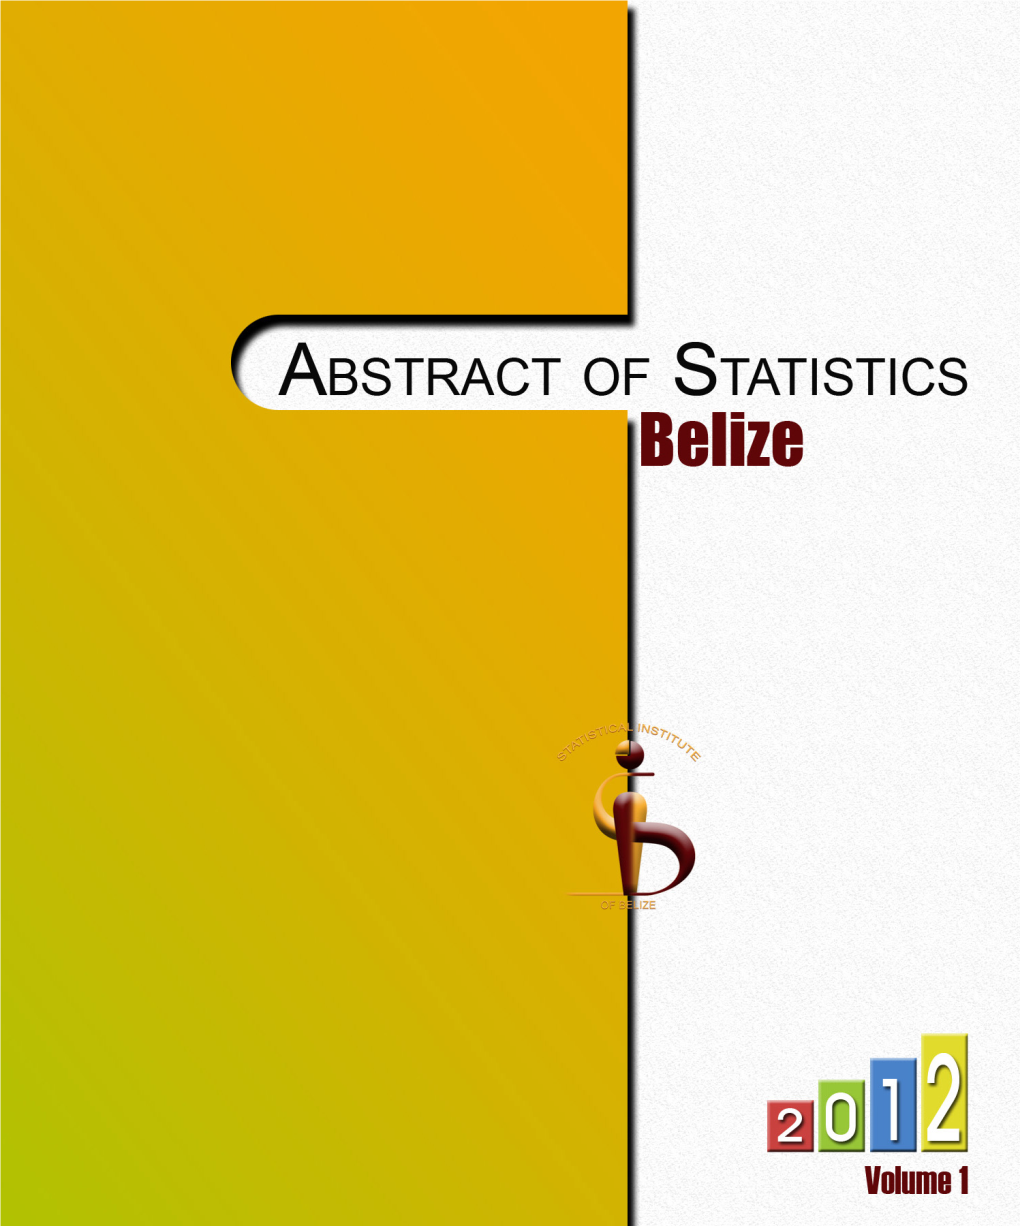 Abstract of Statistics, 2008